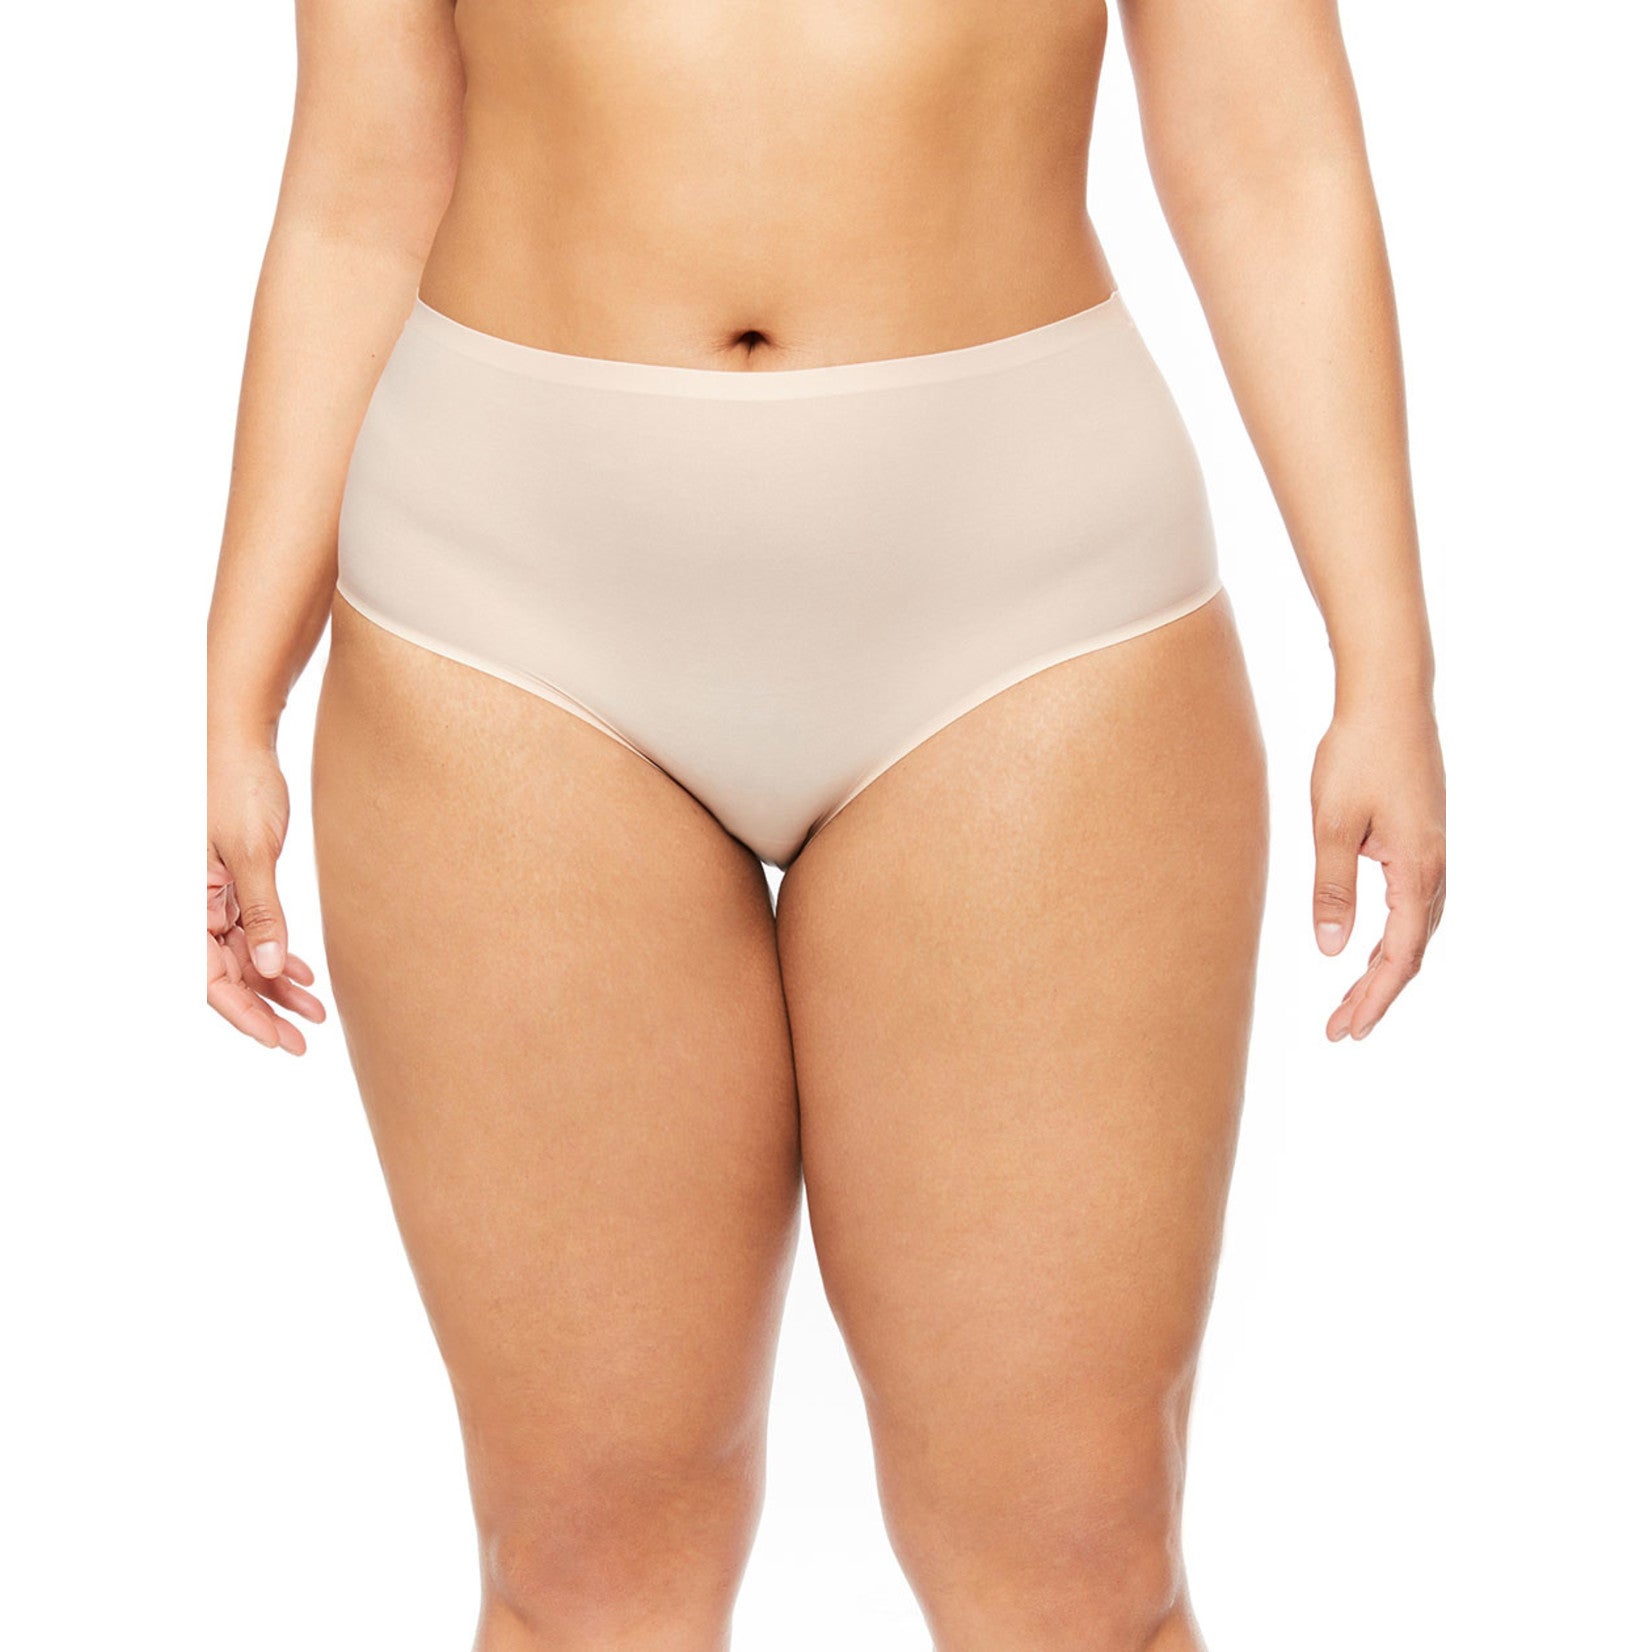 Chantelle High Rise Thong- One Size Fits Most XS-XL